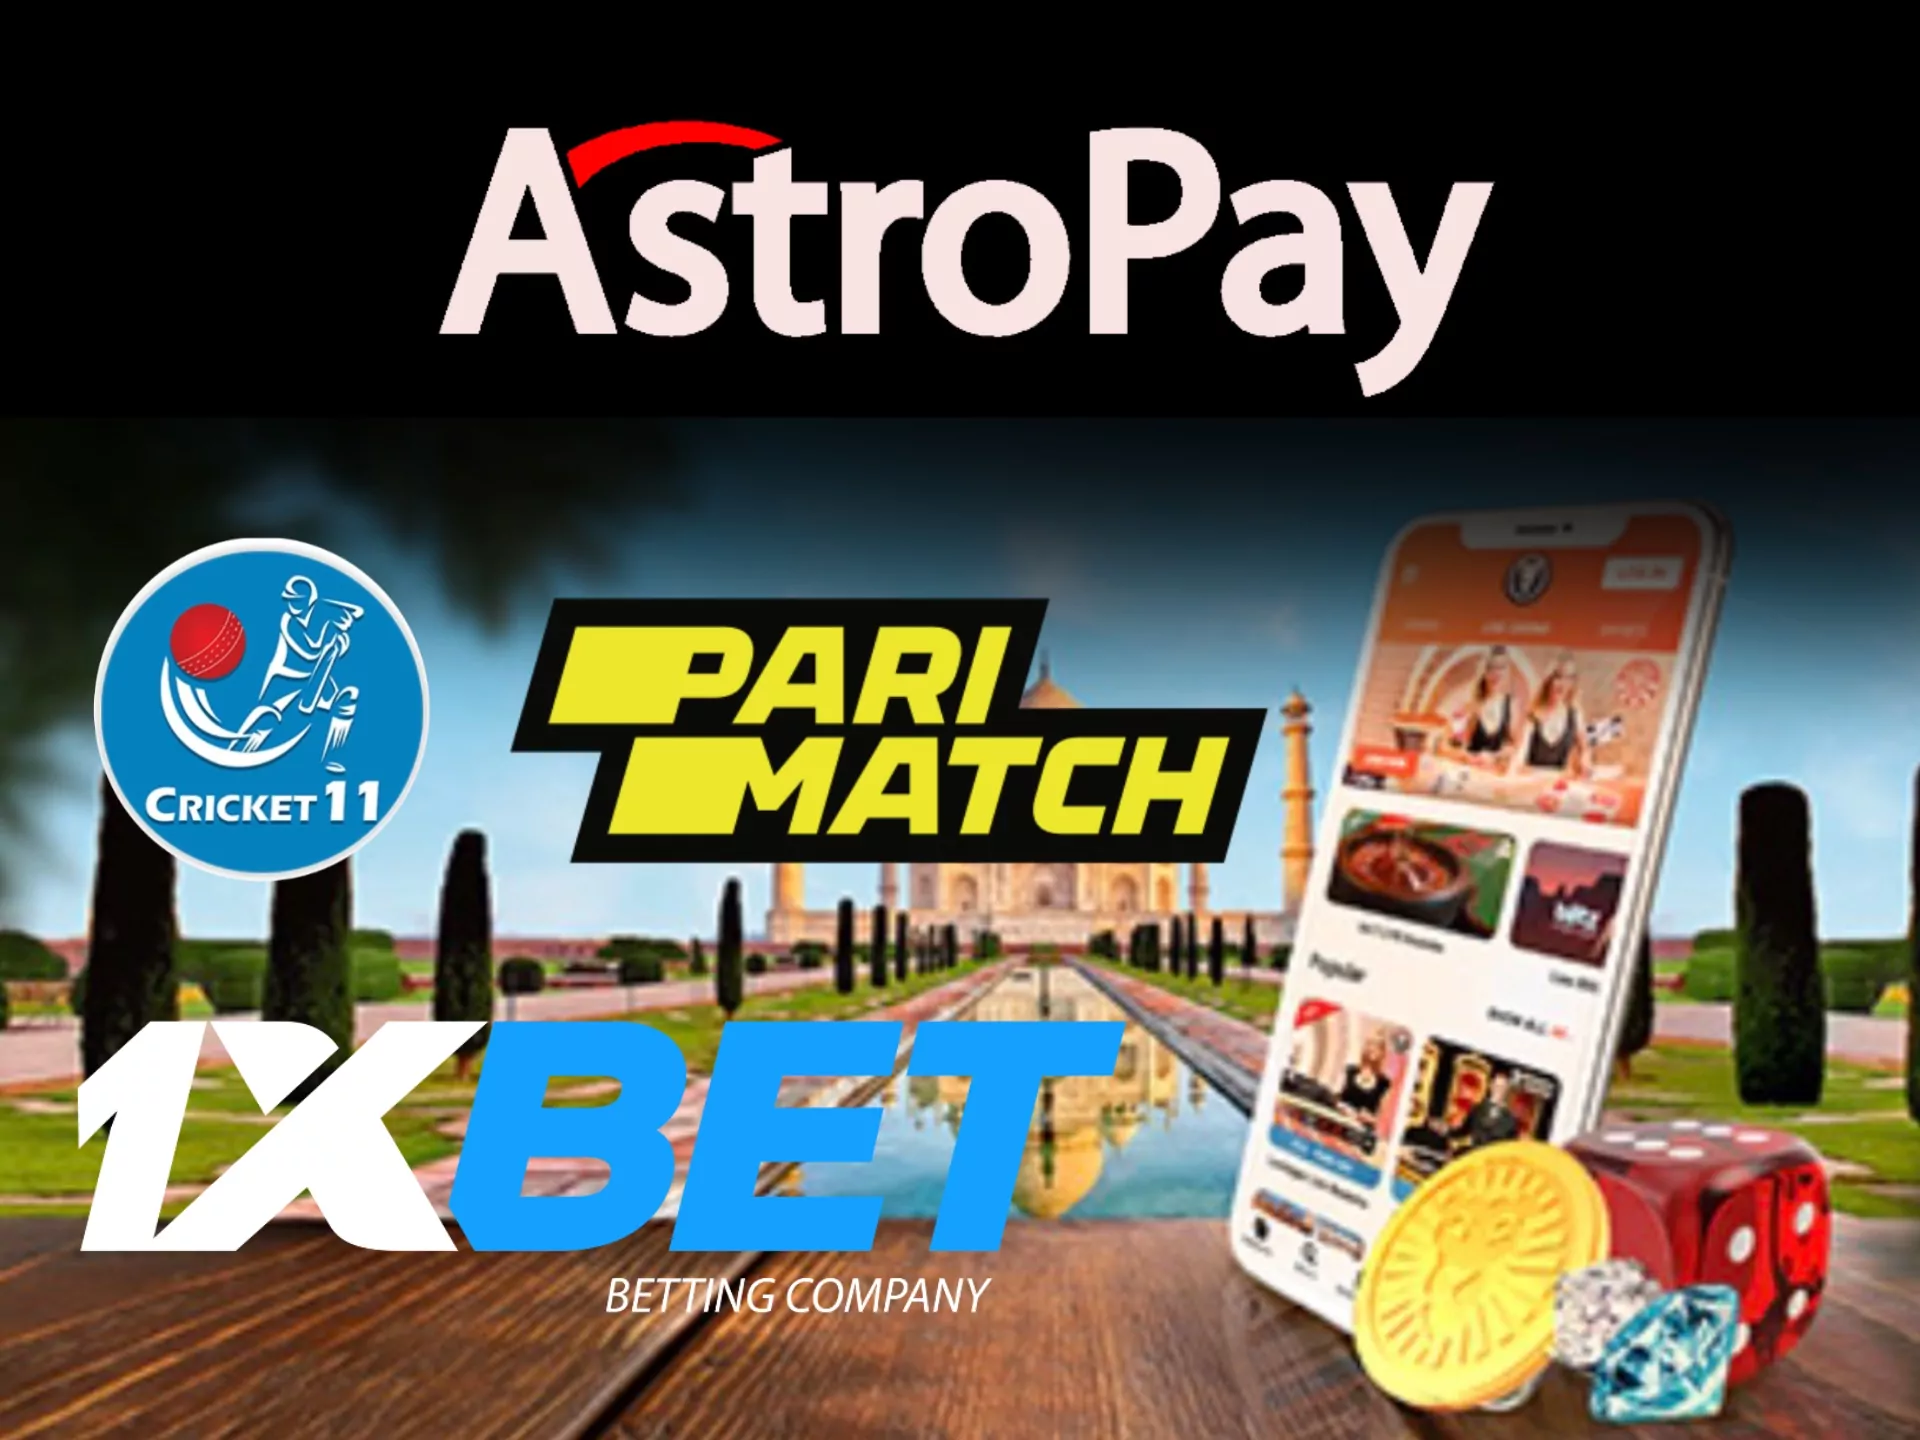 In this casinos you can use Astropay for financial operations.